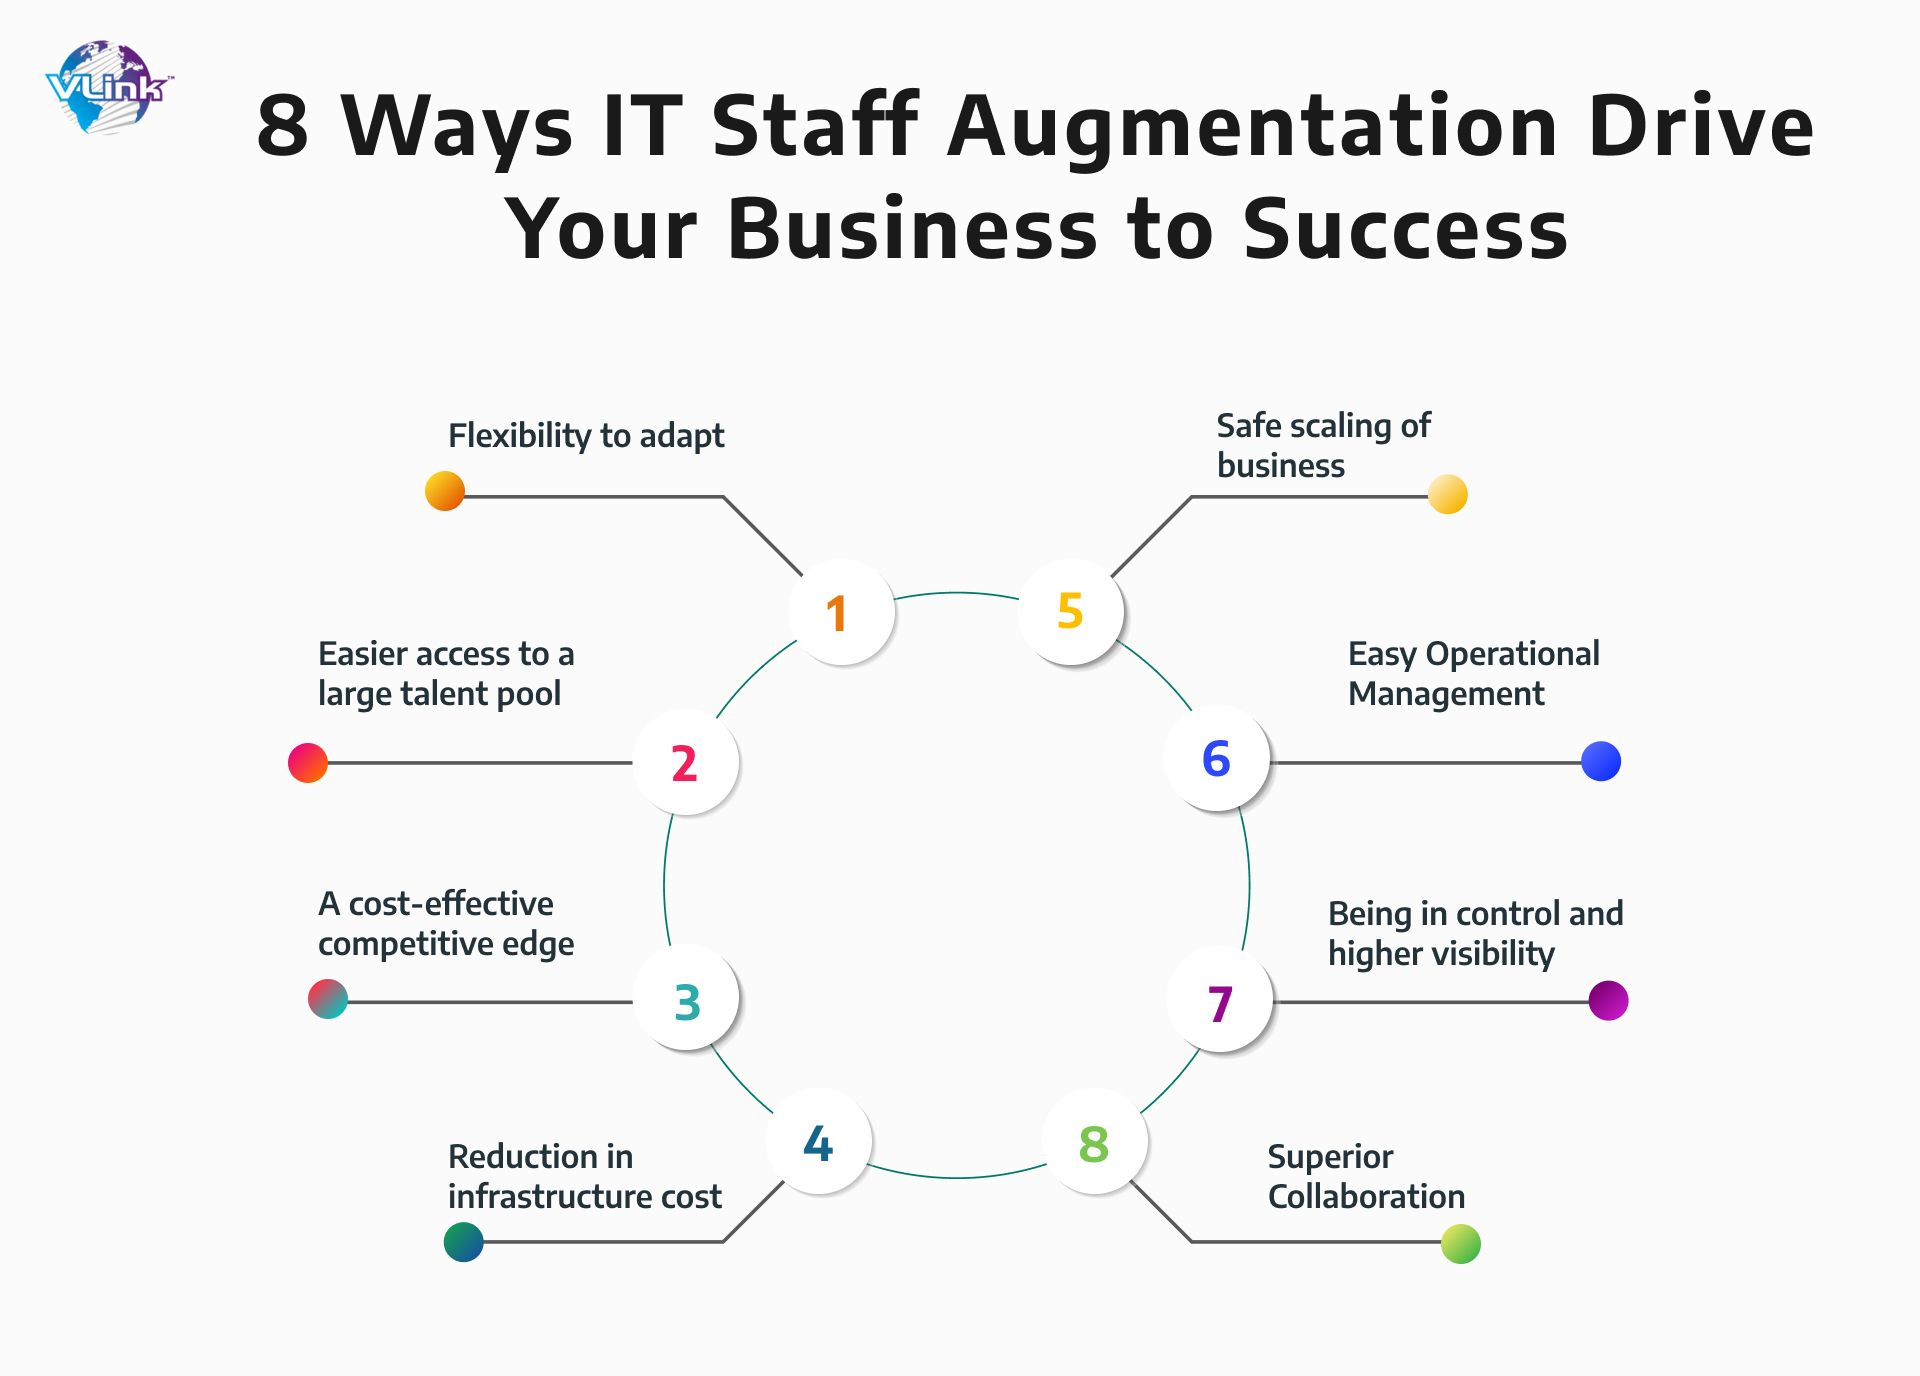 8 Ways IT Staff Augmentation Drive Your Business to Success 